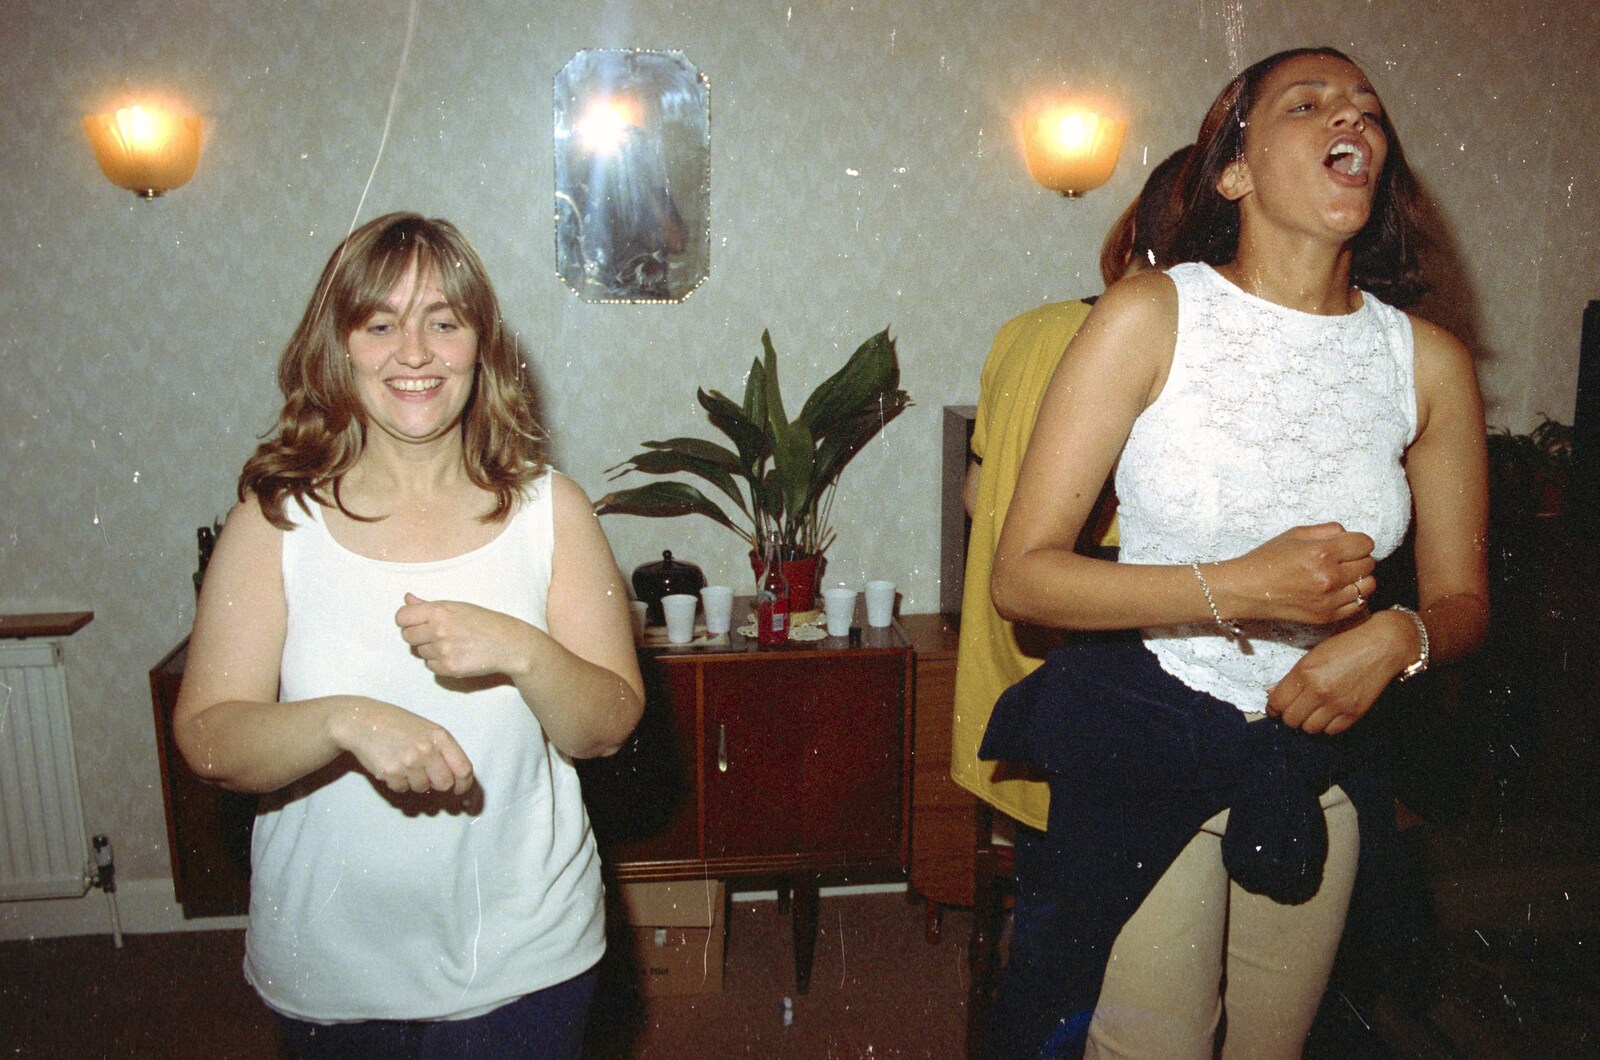 Andrew's CISU Party and the Radio One Roadshow, Ipswich, Suffolk - 18th June 1997: Trudy and Natalie do some form of dancing